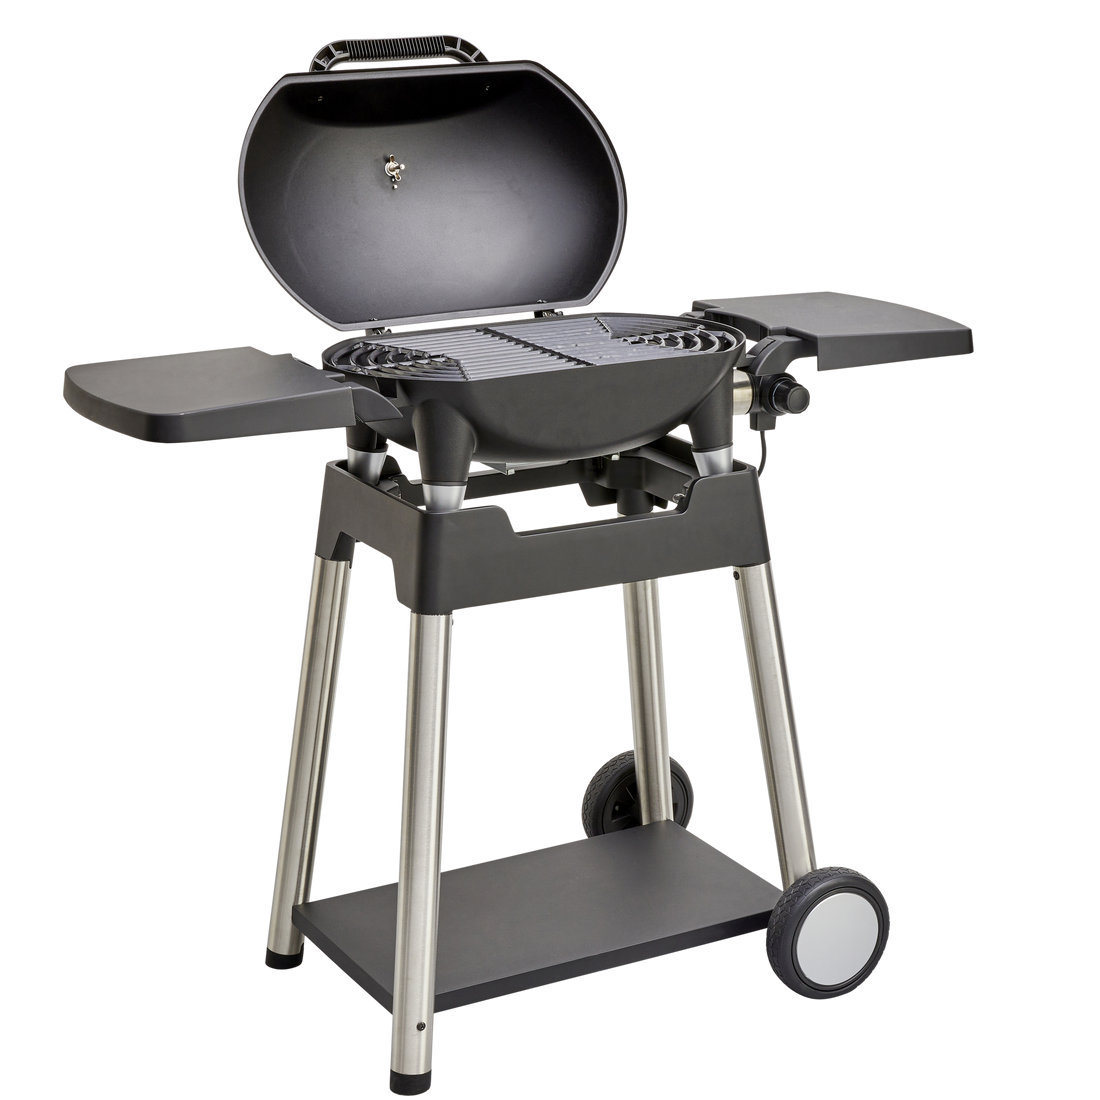 NATERIAL HYPERION 2200W ELECTRIC BBQ WITH TROLLEY - best price from Maltashopper.com BR500015368